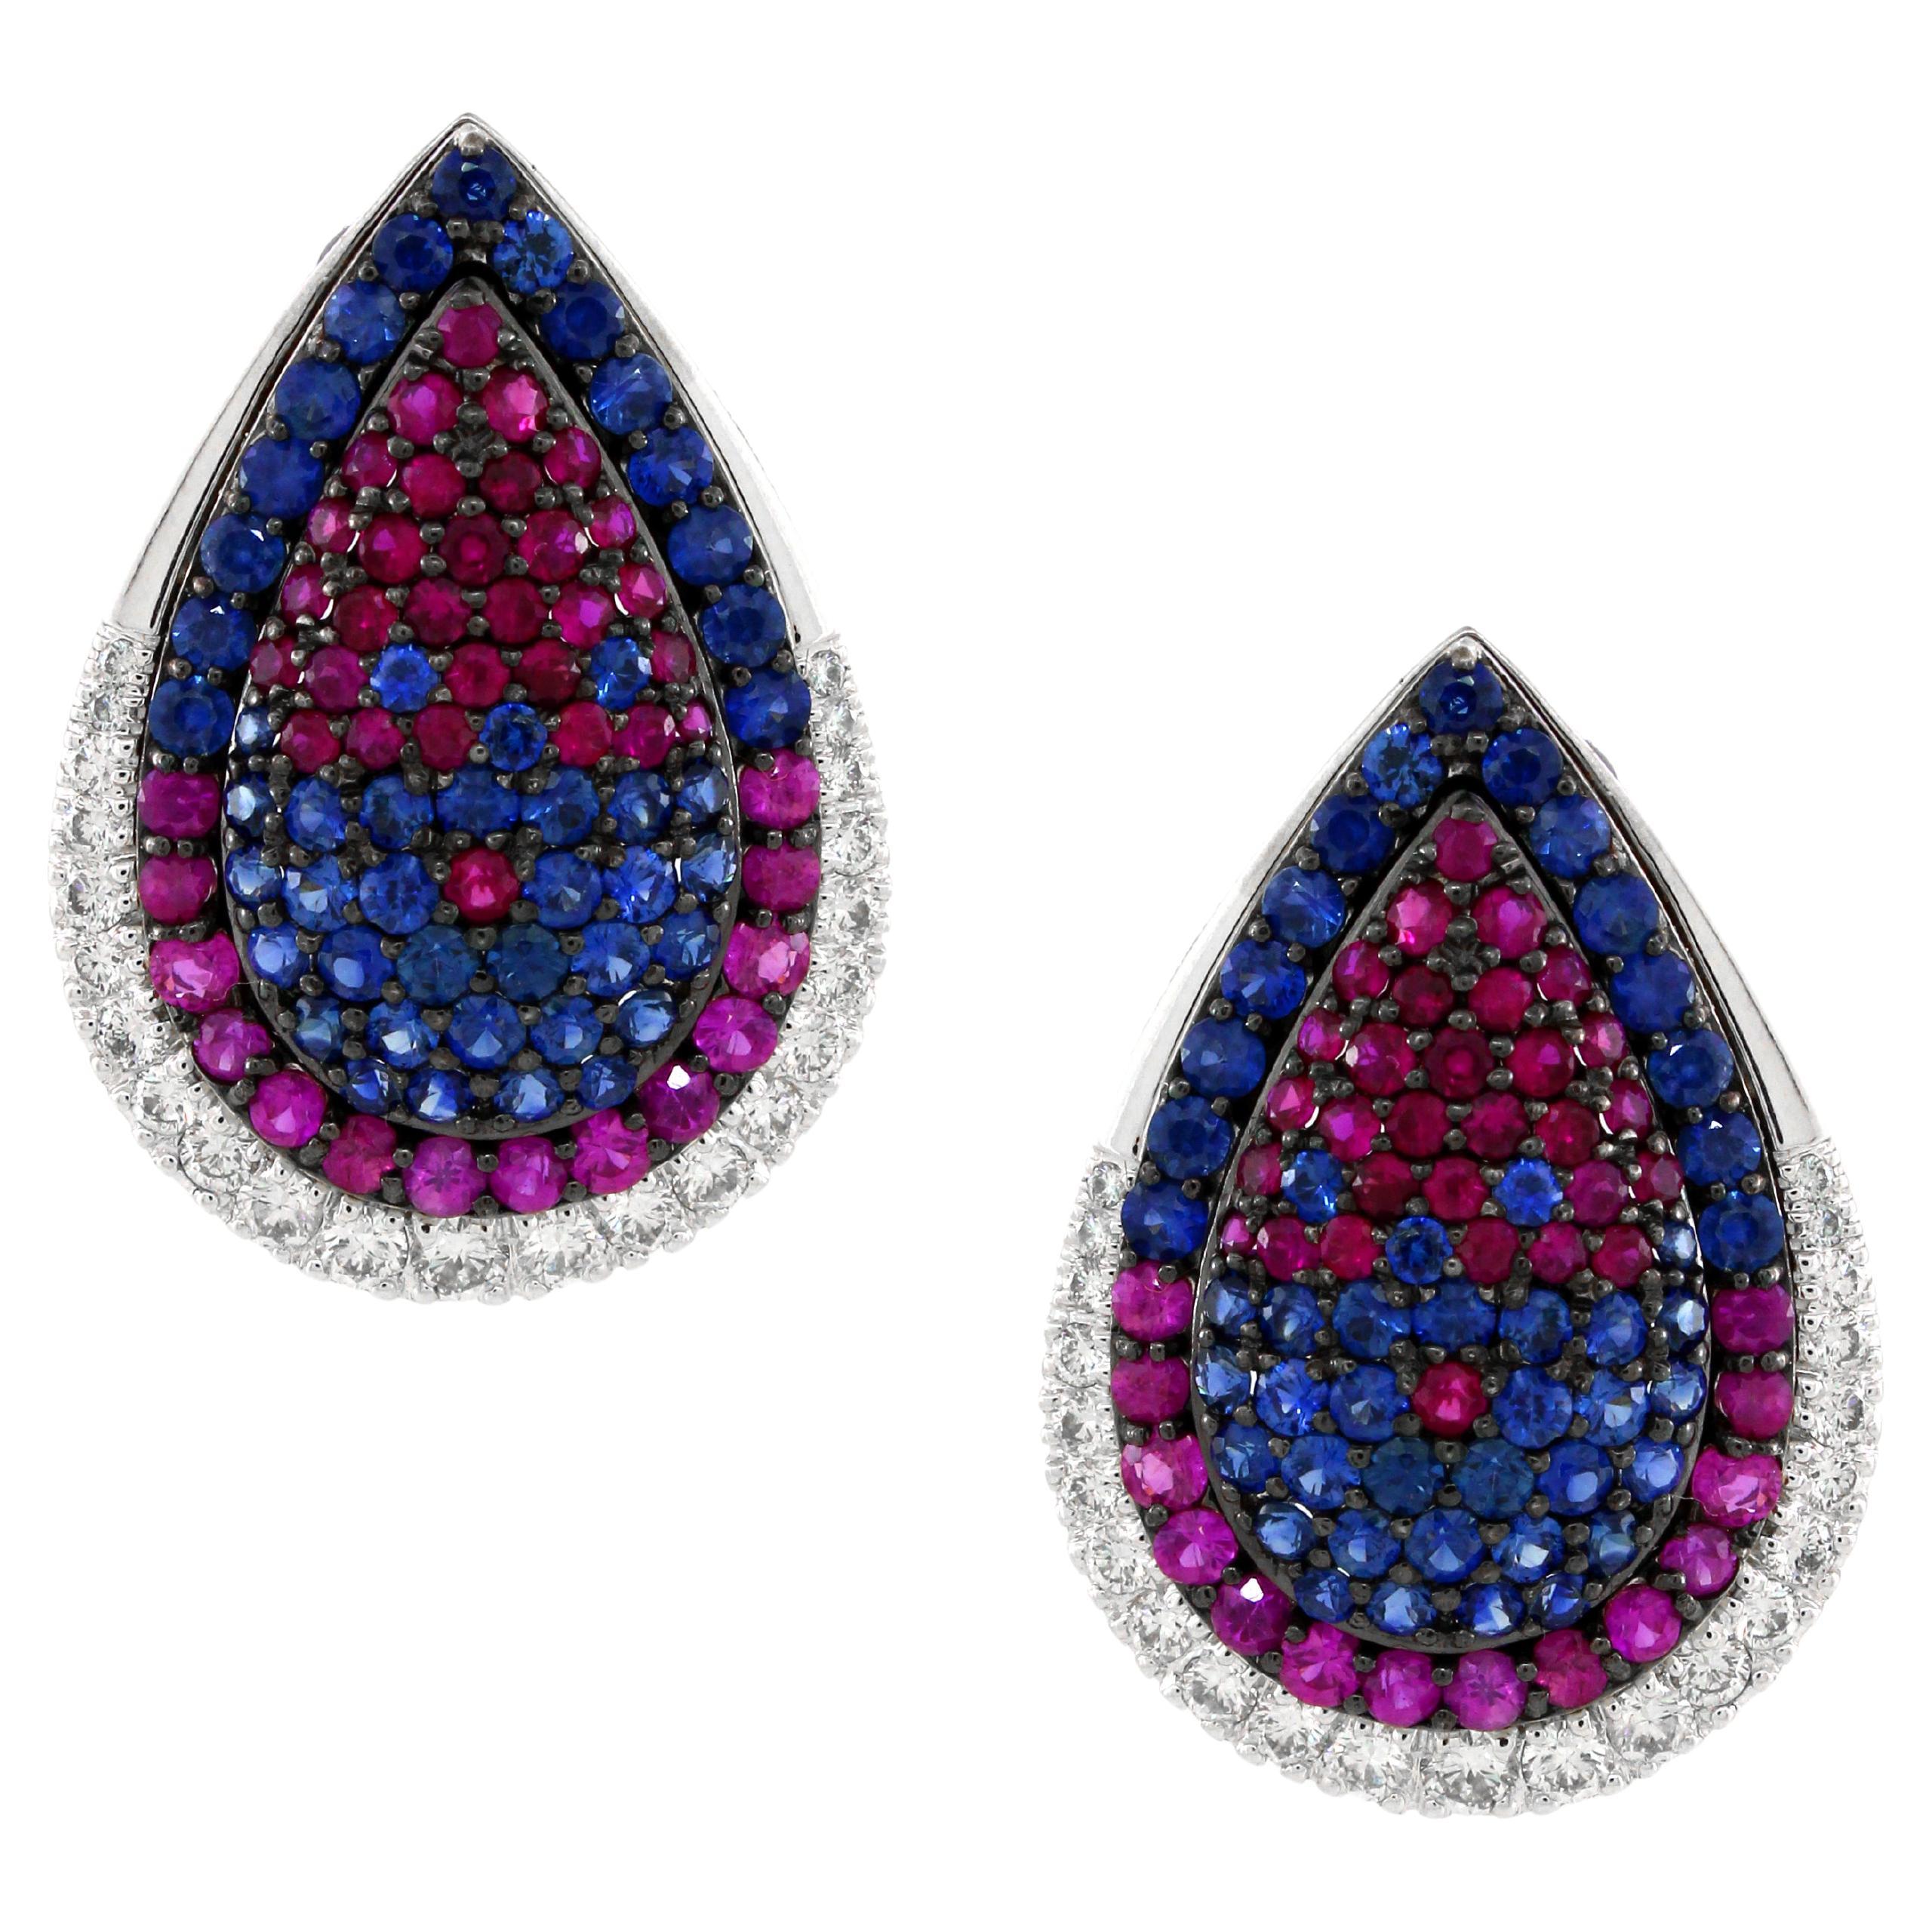 4.11 carats of Sapphire and Ruby Stud Earrings For Sale